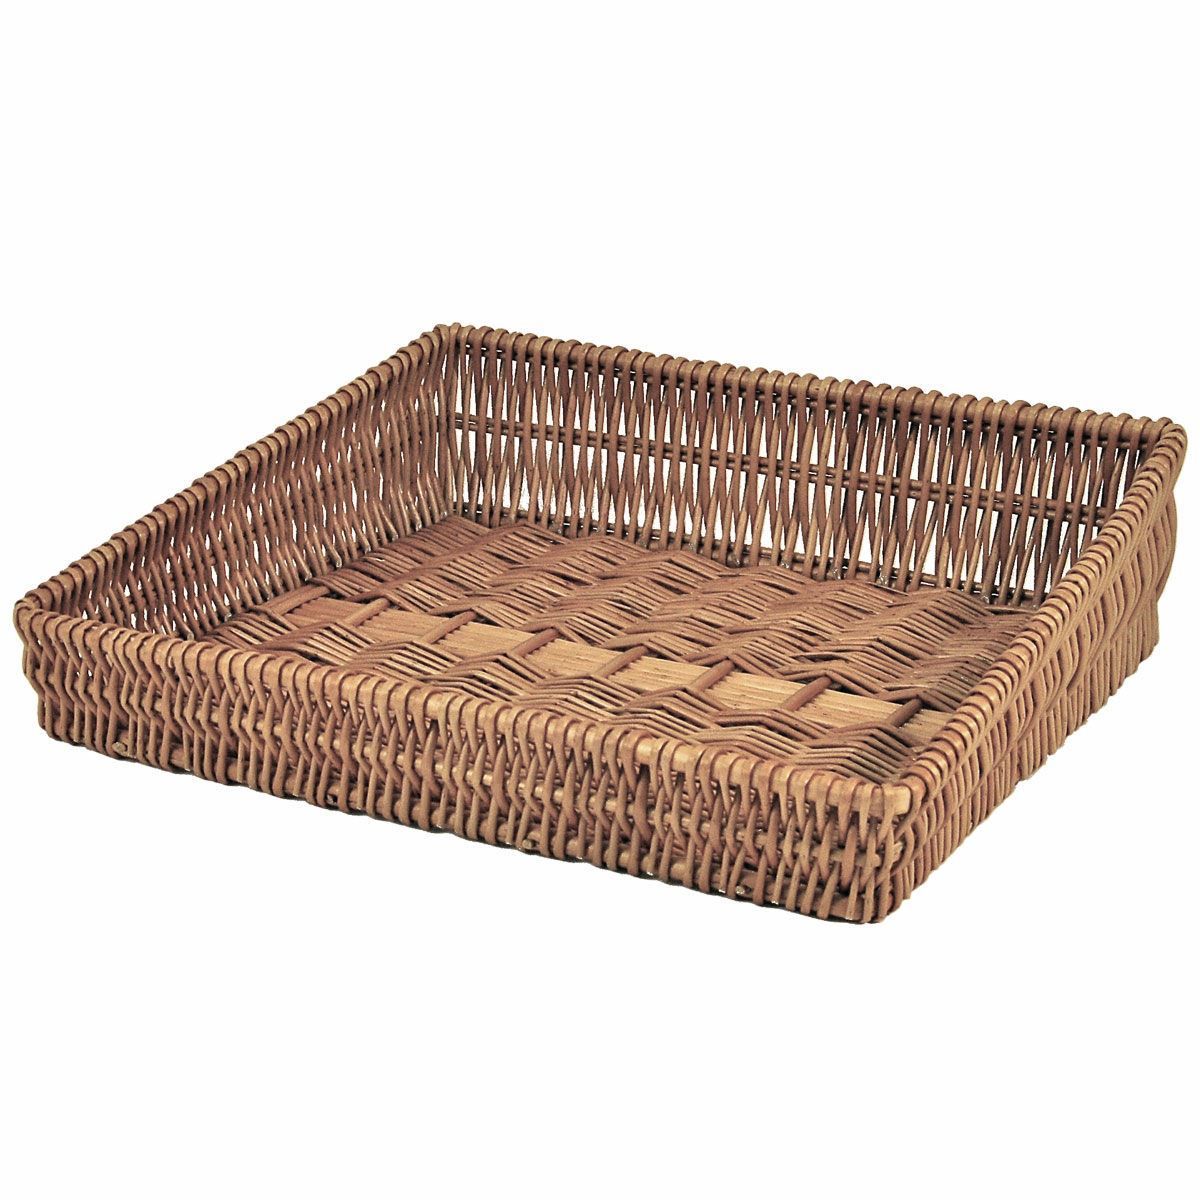 Large Wicker Display Tray